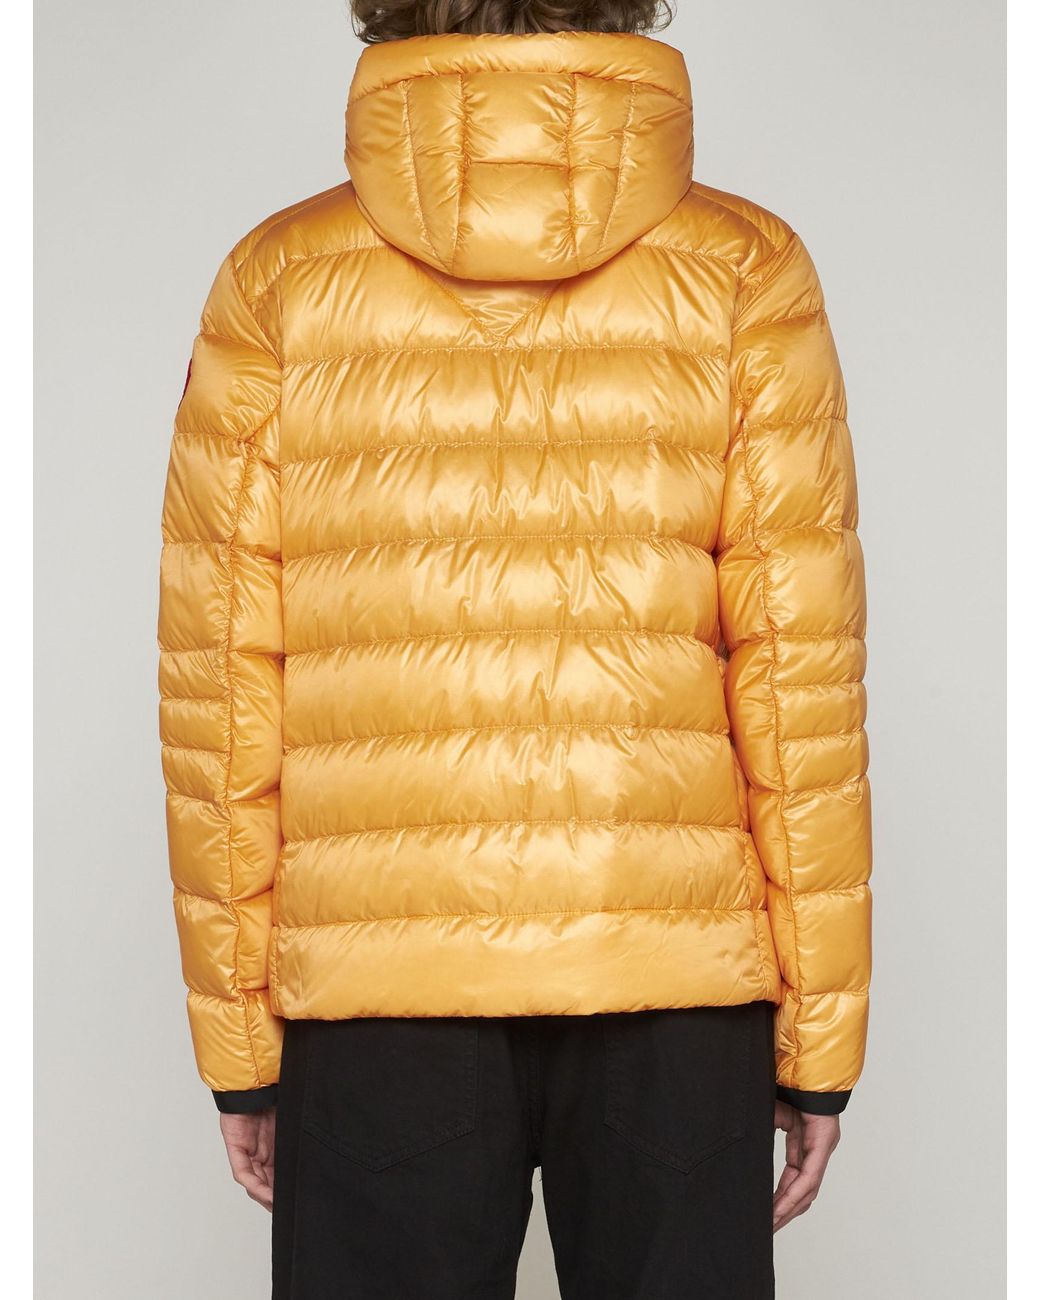 Canada Goose Crofton Quilted Nylon Down Jacket in Yellow for Men | Lyst